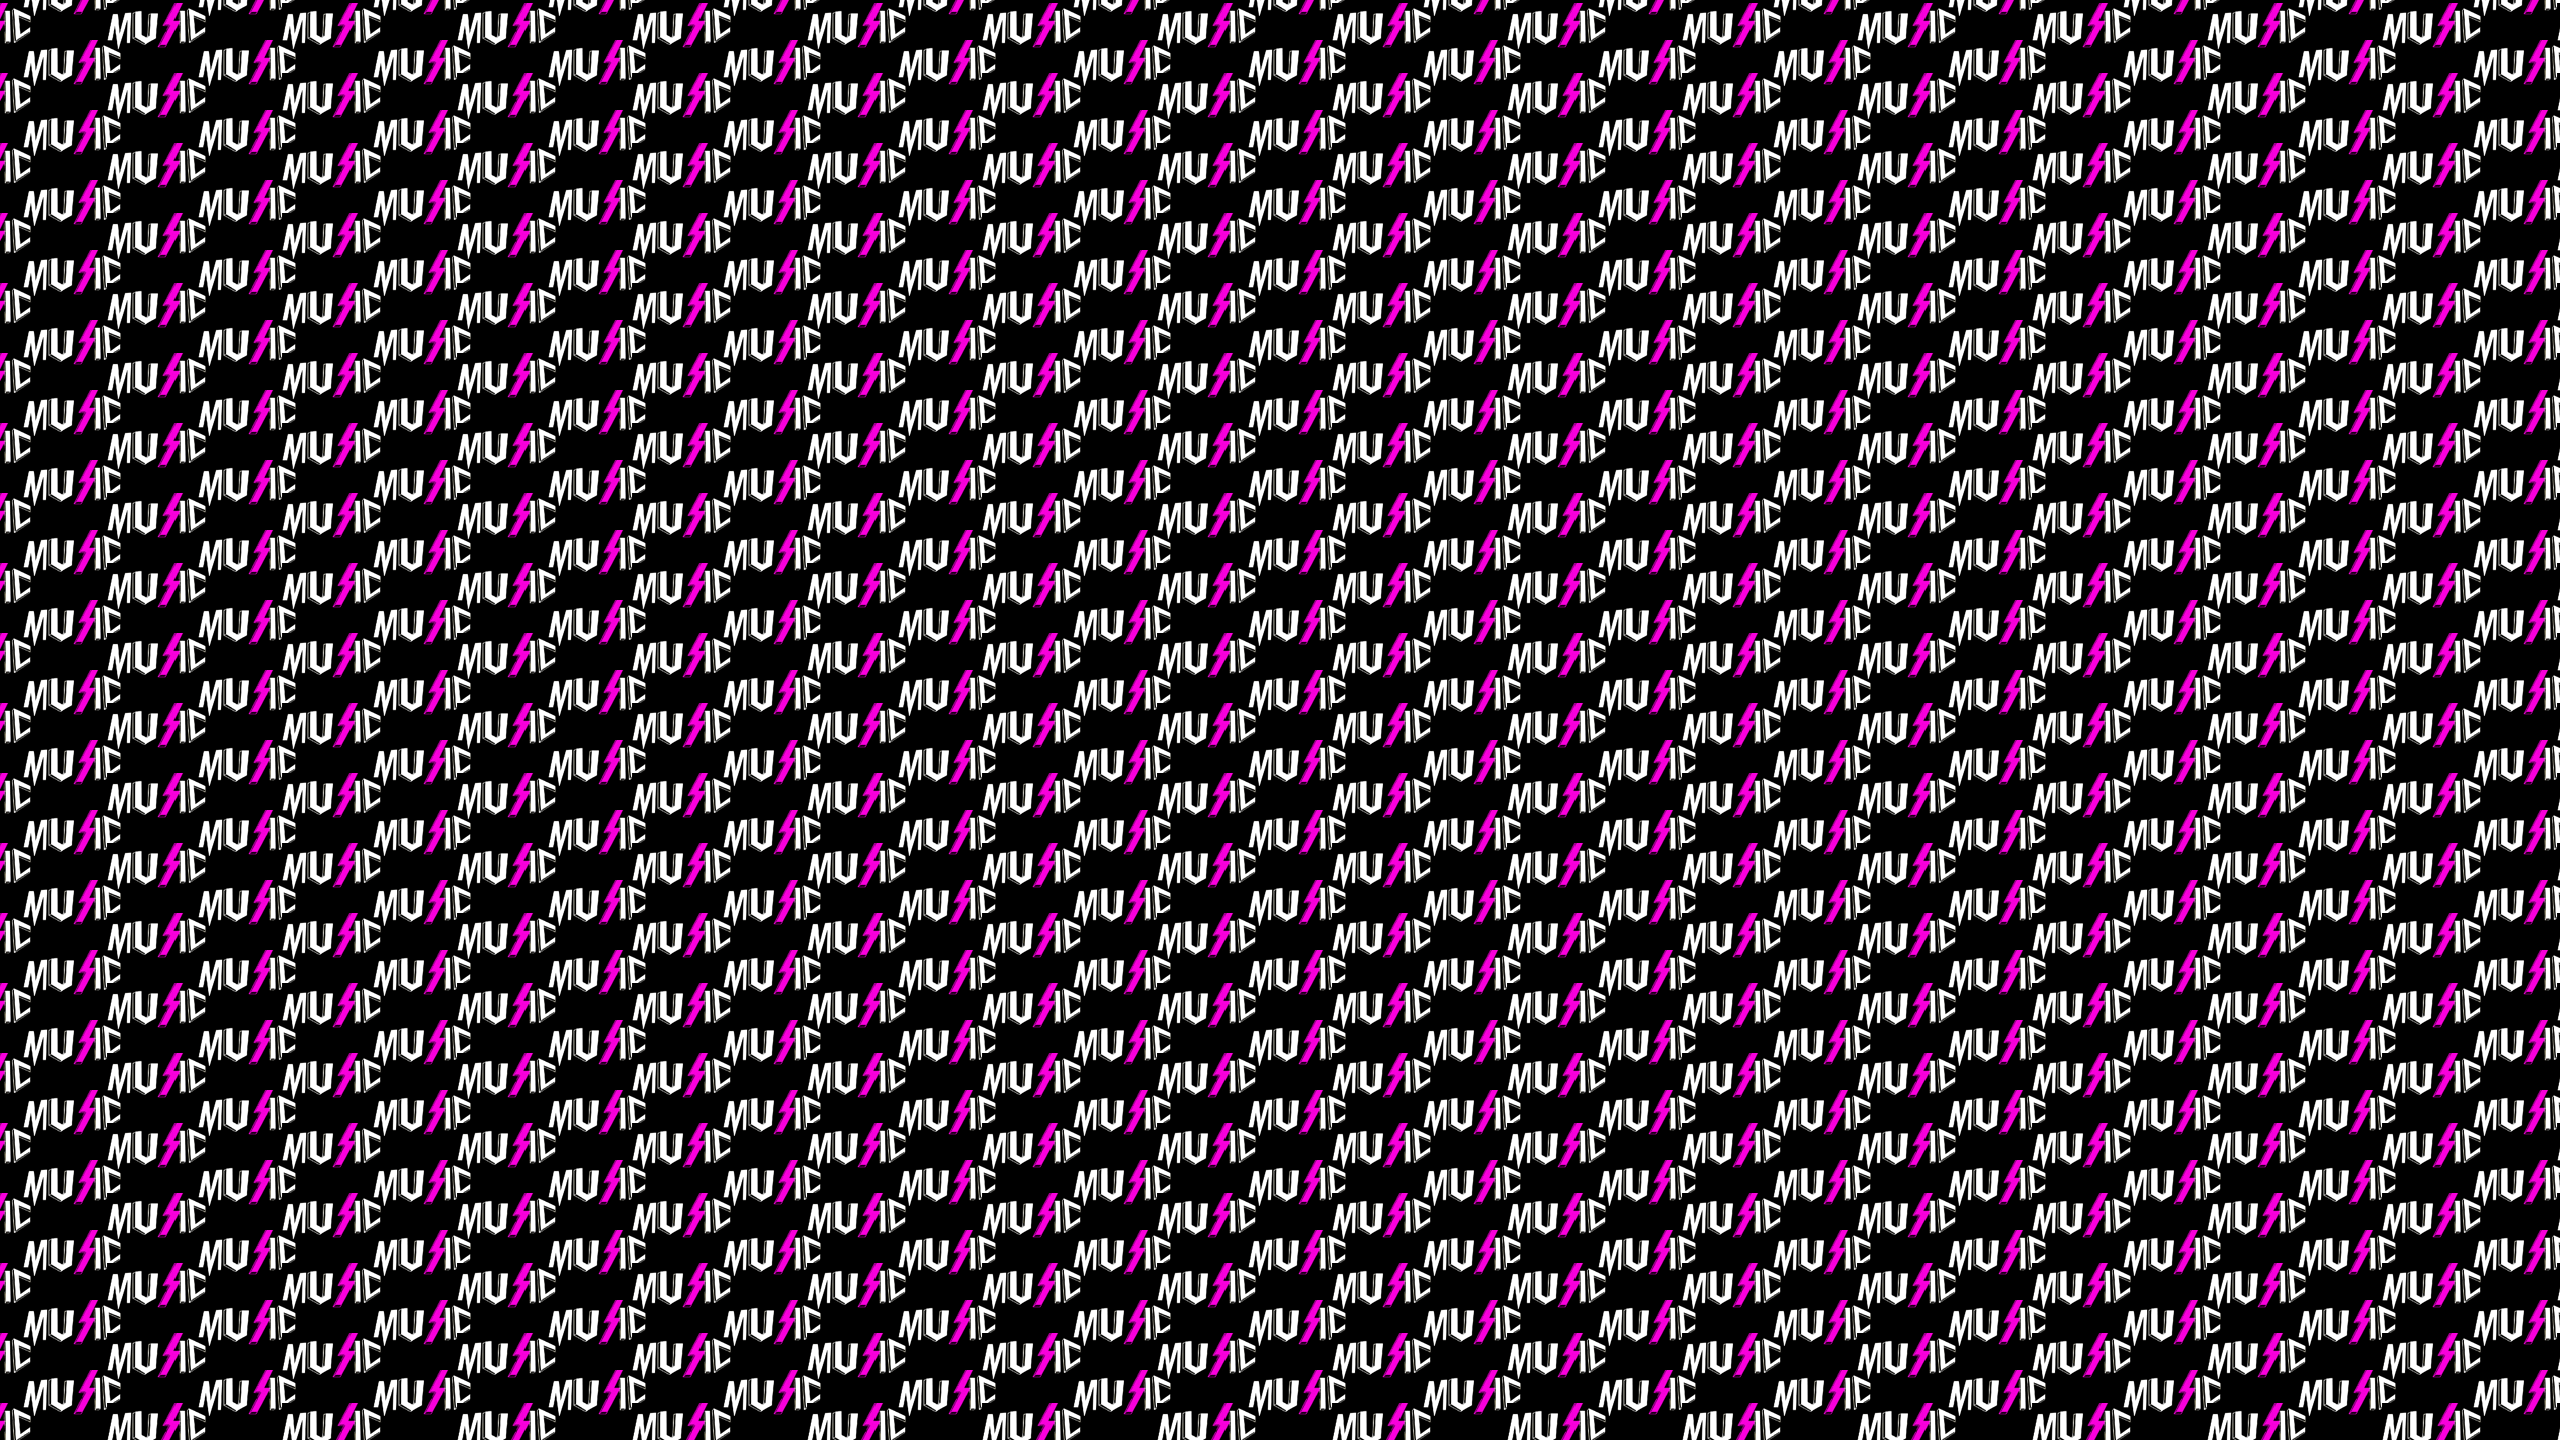 This Pink Music Desktop Wallpaper Is Easy Just Save The